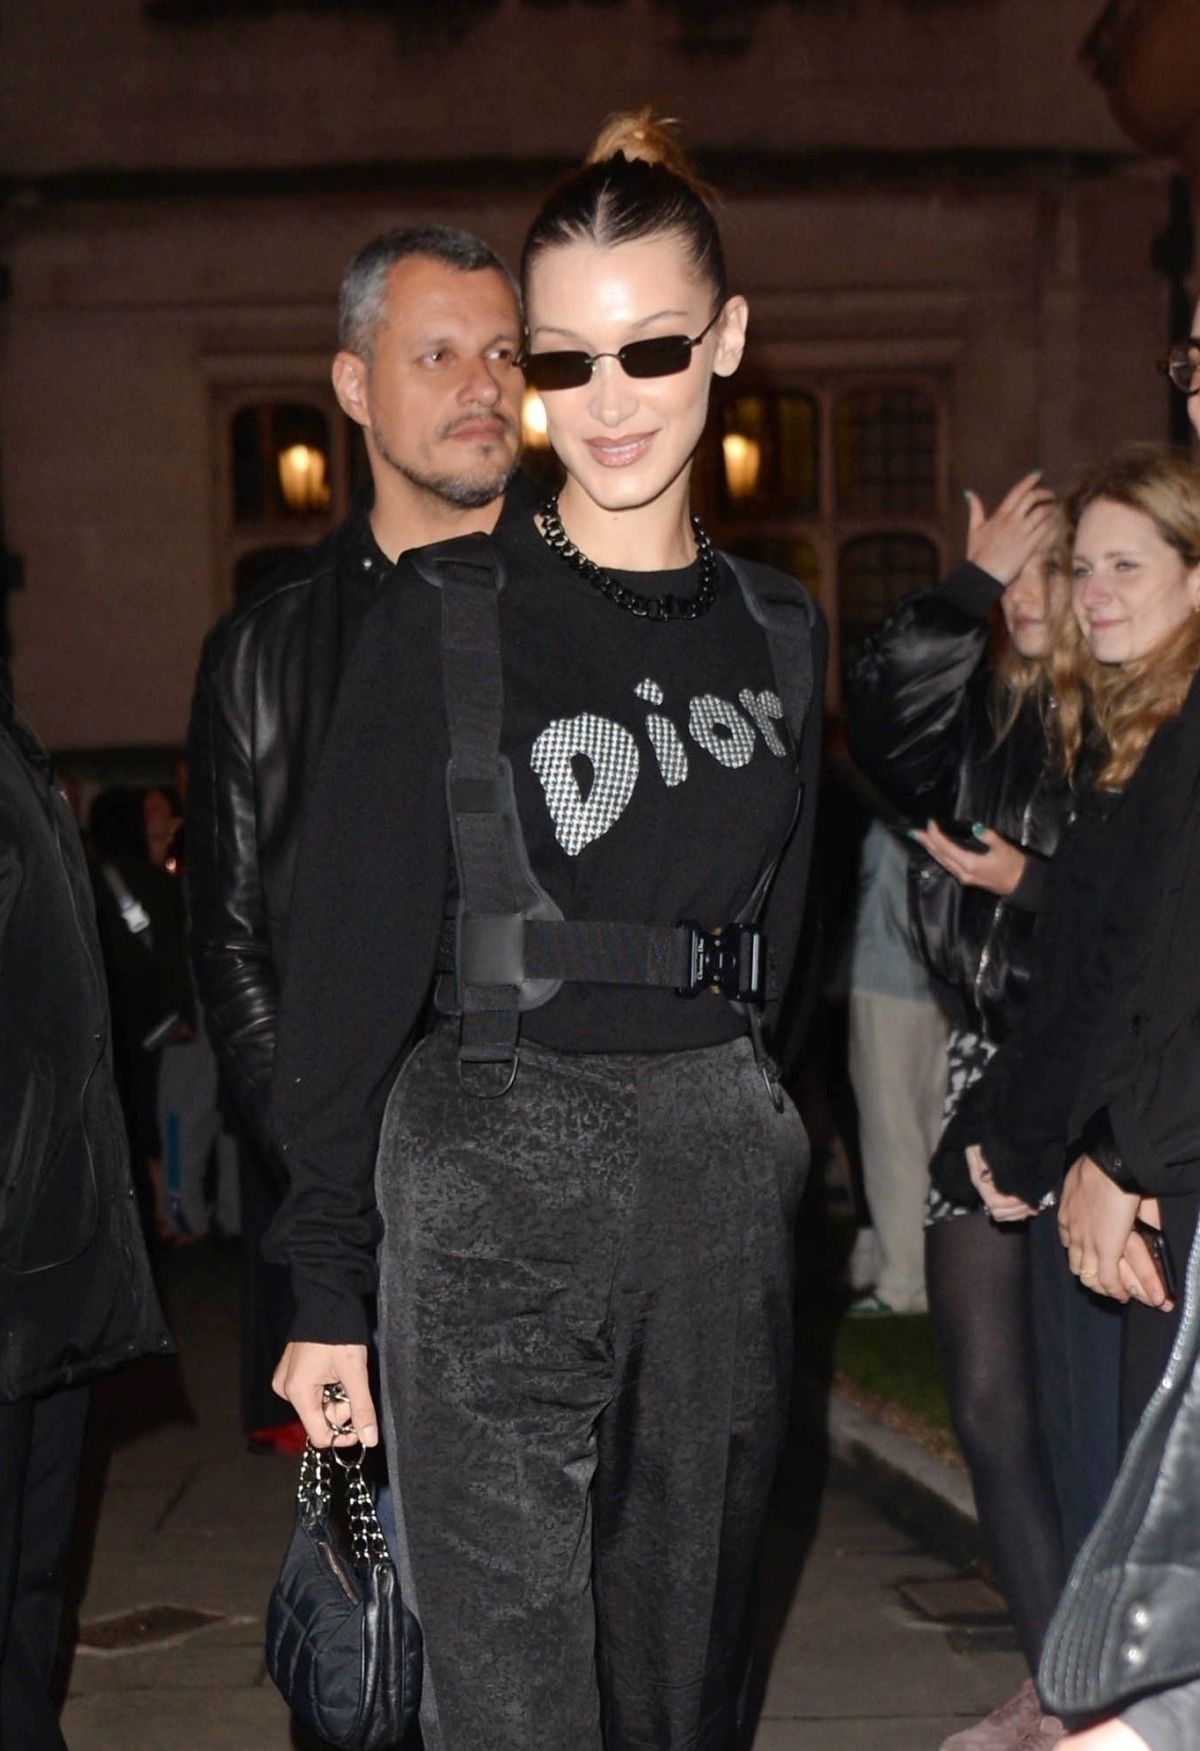 bella-hadid-leaves-a-magazine-curated-by-issue-launch-party-in-london-05-29-2019-7.jpg